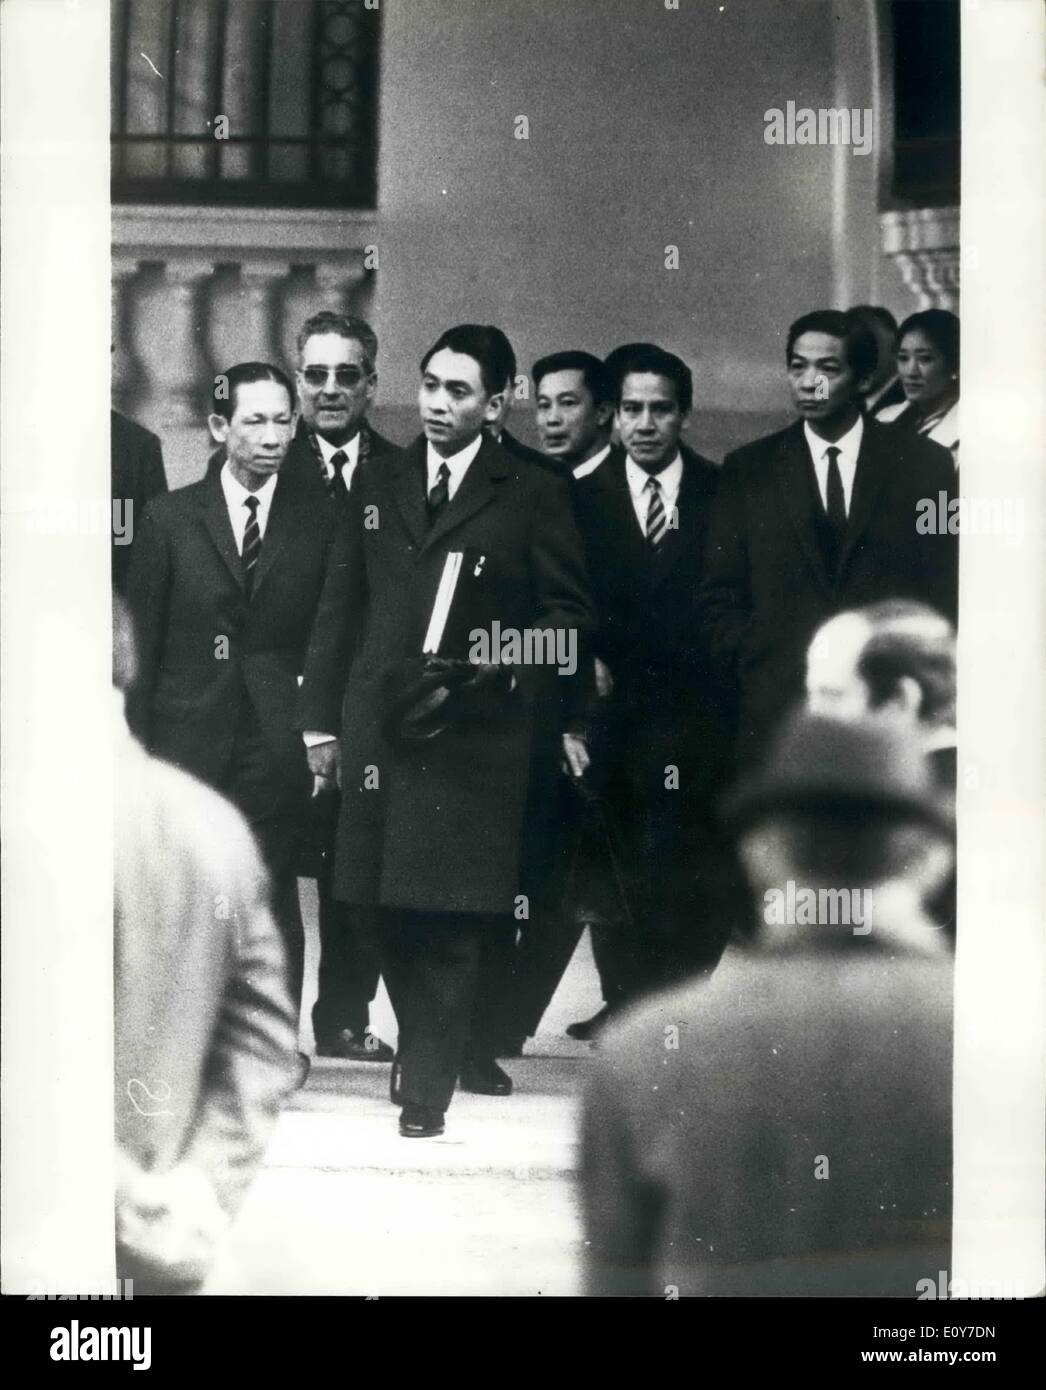 Jan. 01, 1969 - Vietnam peace talks to start next week: Agreement was reached on all procedural matters. at the Paris peace talks yesterday. and the real negotiations ill start probably on Tuesday. photo shows The South Vietnamese delegation lead by M. Nguyen Xvam Phang holding hat arrives for the start of the talks in Paris, yesterday. Stock Photo